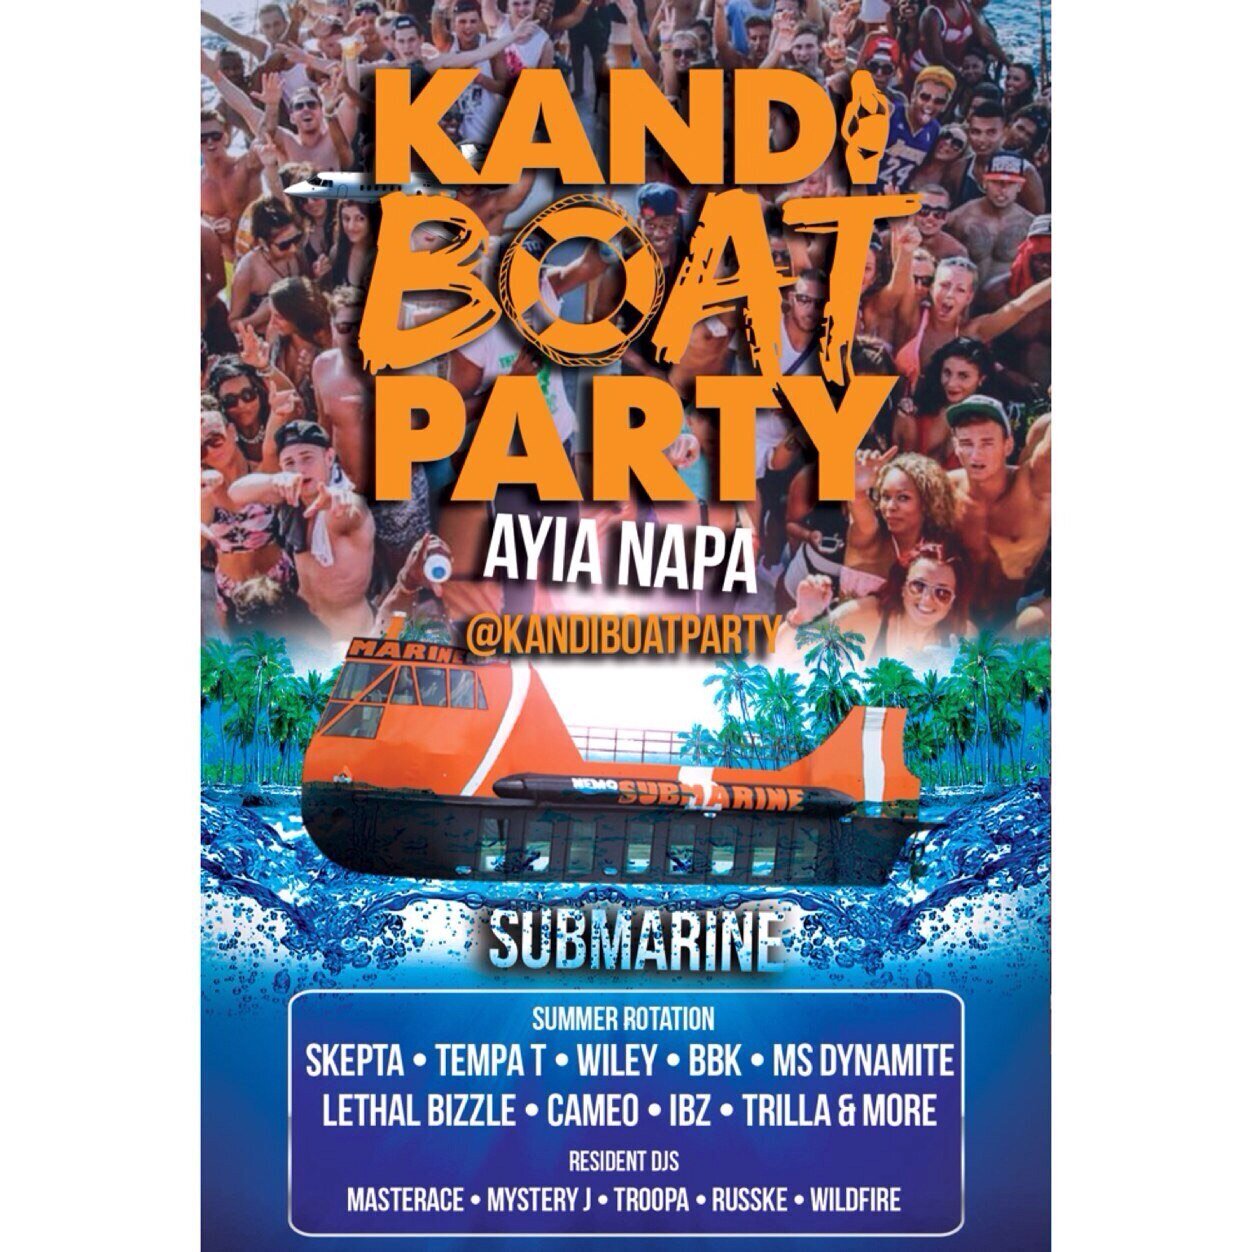 The Official Kandi Boat Party ticket sales page ☀️Tickets hotline Contact: TEL: 0035796625722 E-MAIL: KandiBoatTickets@hotmail.com for ticket reservations